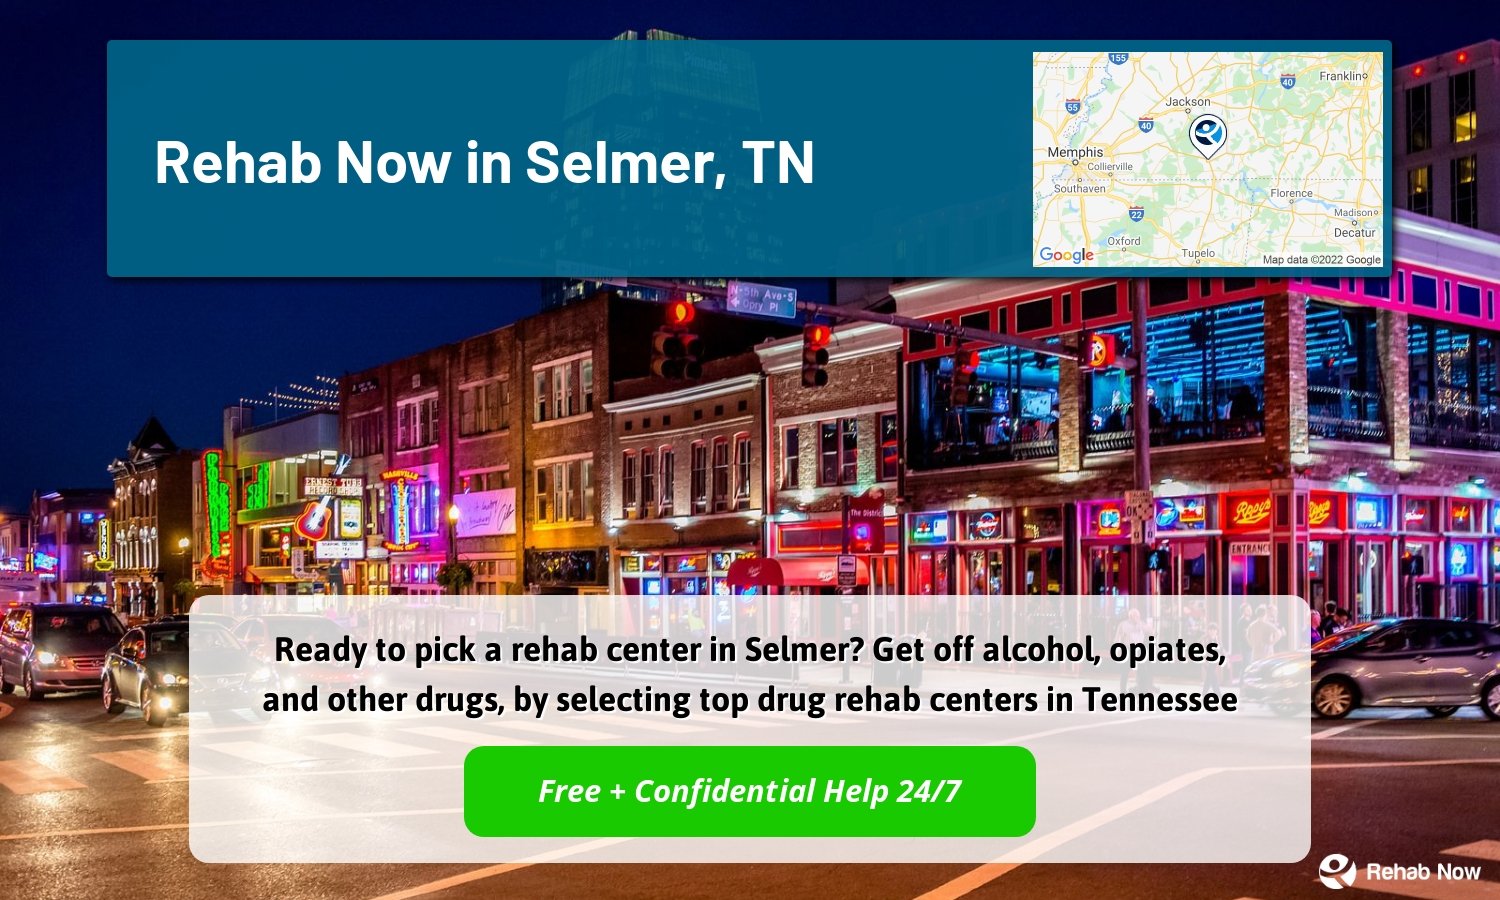 Ready to pick a rehab center in Selmer? Get off alcohol, opiates, and other drugs, by selecting top drug rehab centers in Tennessee